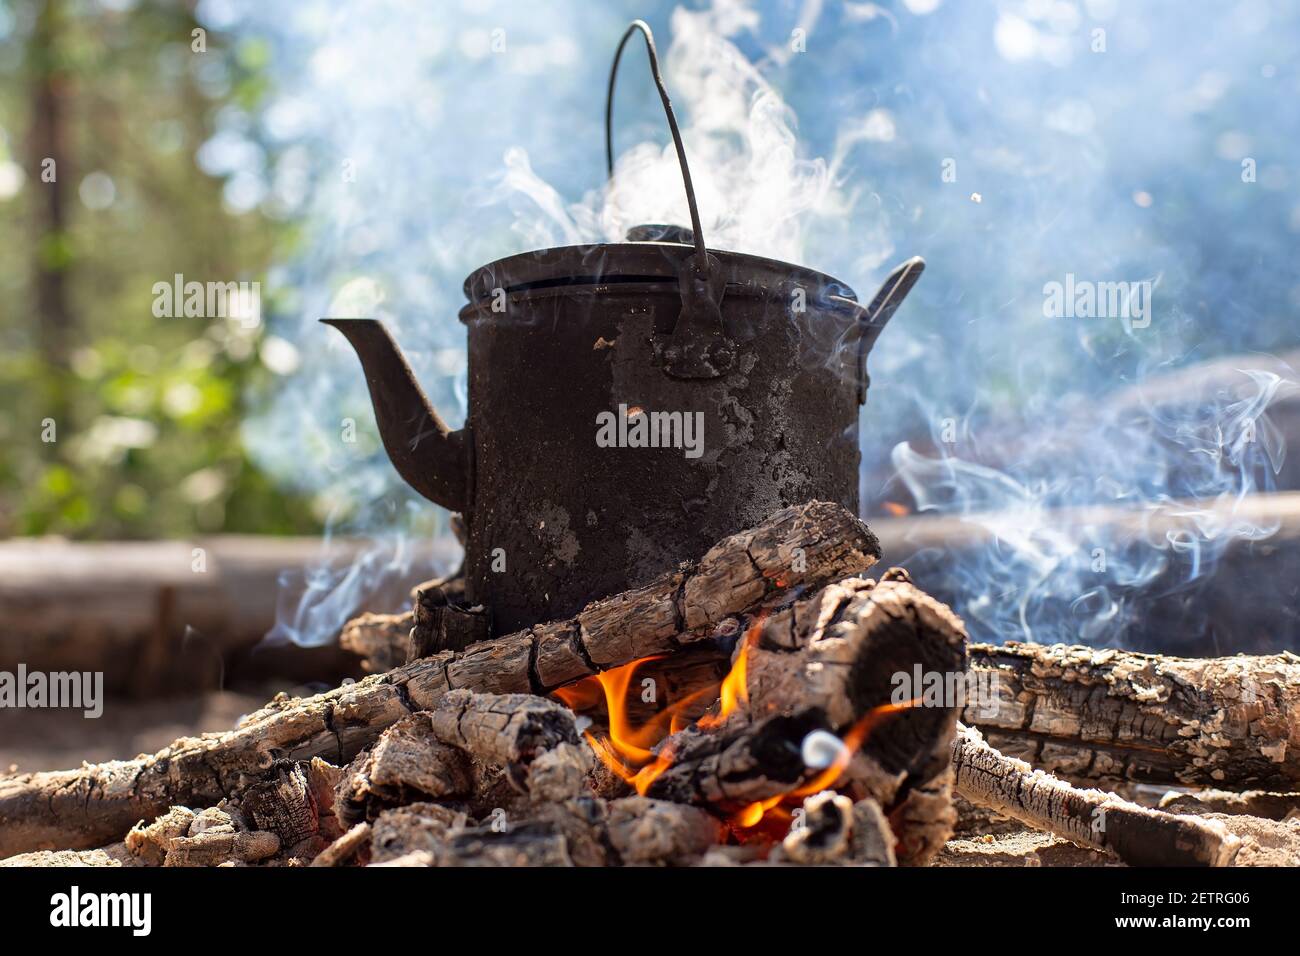 https://c8.alamy.com/comp/2ETRG06/boiling-kettle-with-hot-drink-stands-on-a-campfire-in-the-smoke-in-a-forest-2ETRG06.jpg